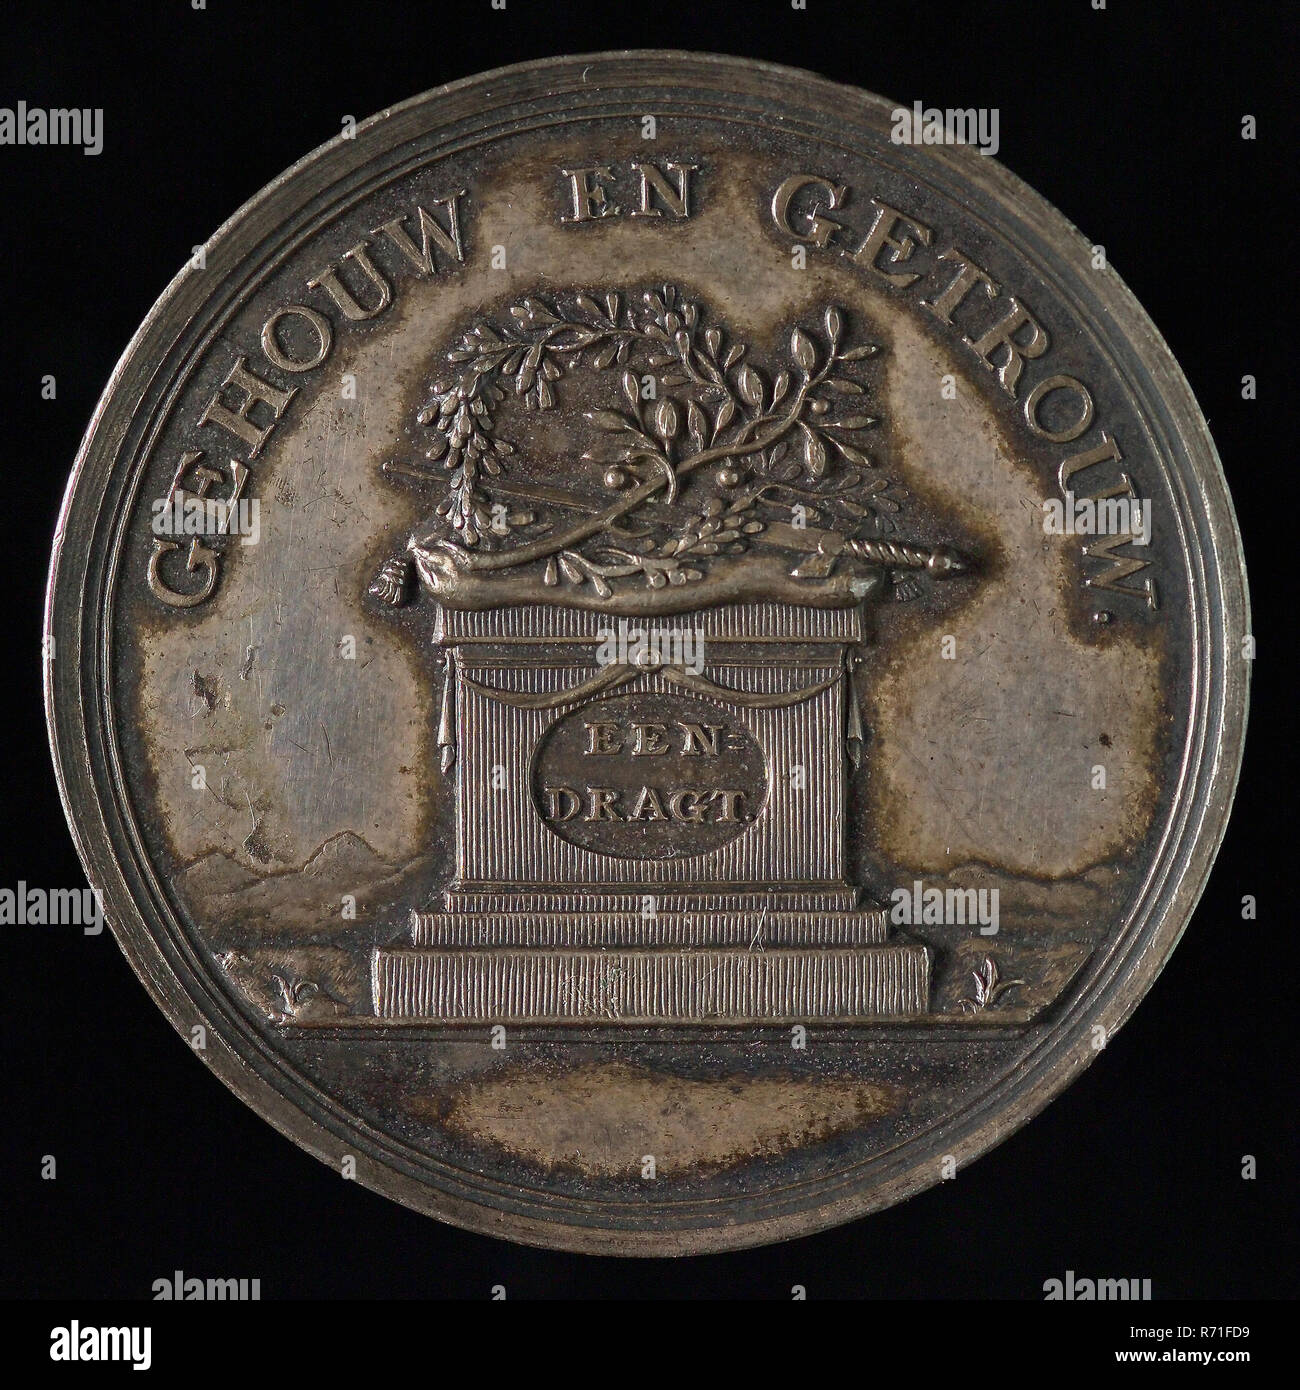 Medal on the preserved peace in the city of Rotterdam, penning footage silver, Weapon of Rotterdam between S and C (Senatu Consulto = having heard the senate vroedschap); underneath suspended cloth on which text, Erkentenis for the preserved Rust within the City at the repair of 's-Lands lawful Constitution Ao. 1787 Rotterdam kept calm custodian Stock Photo